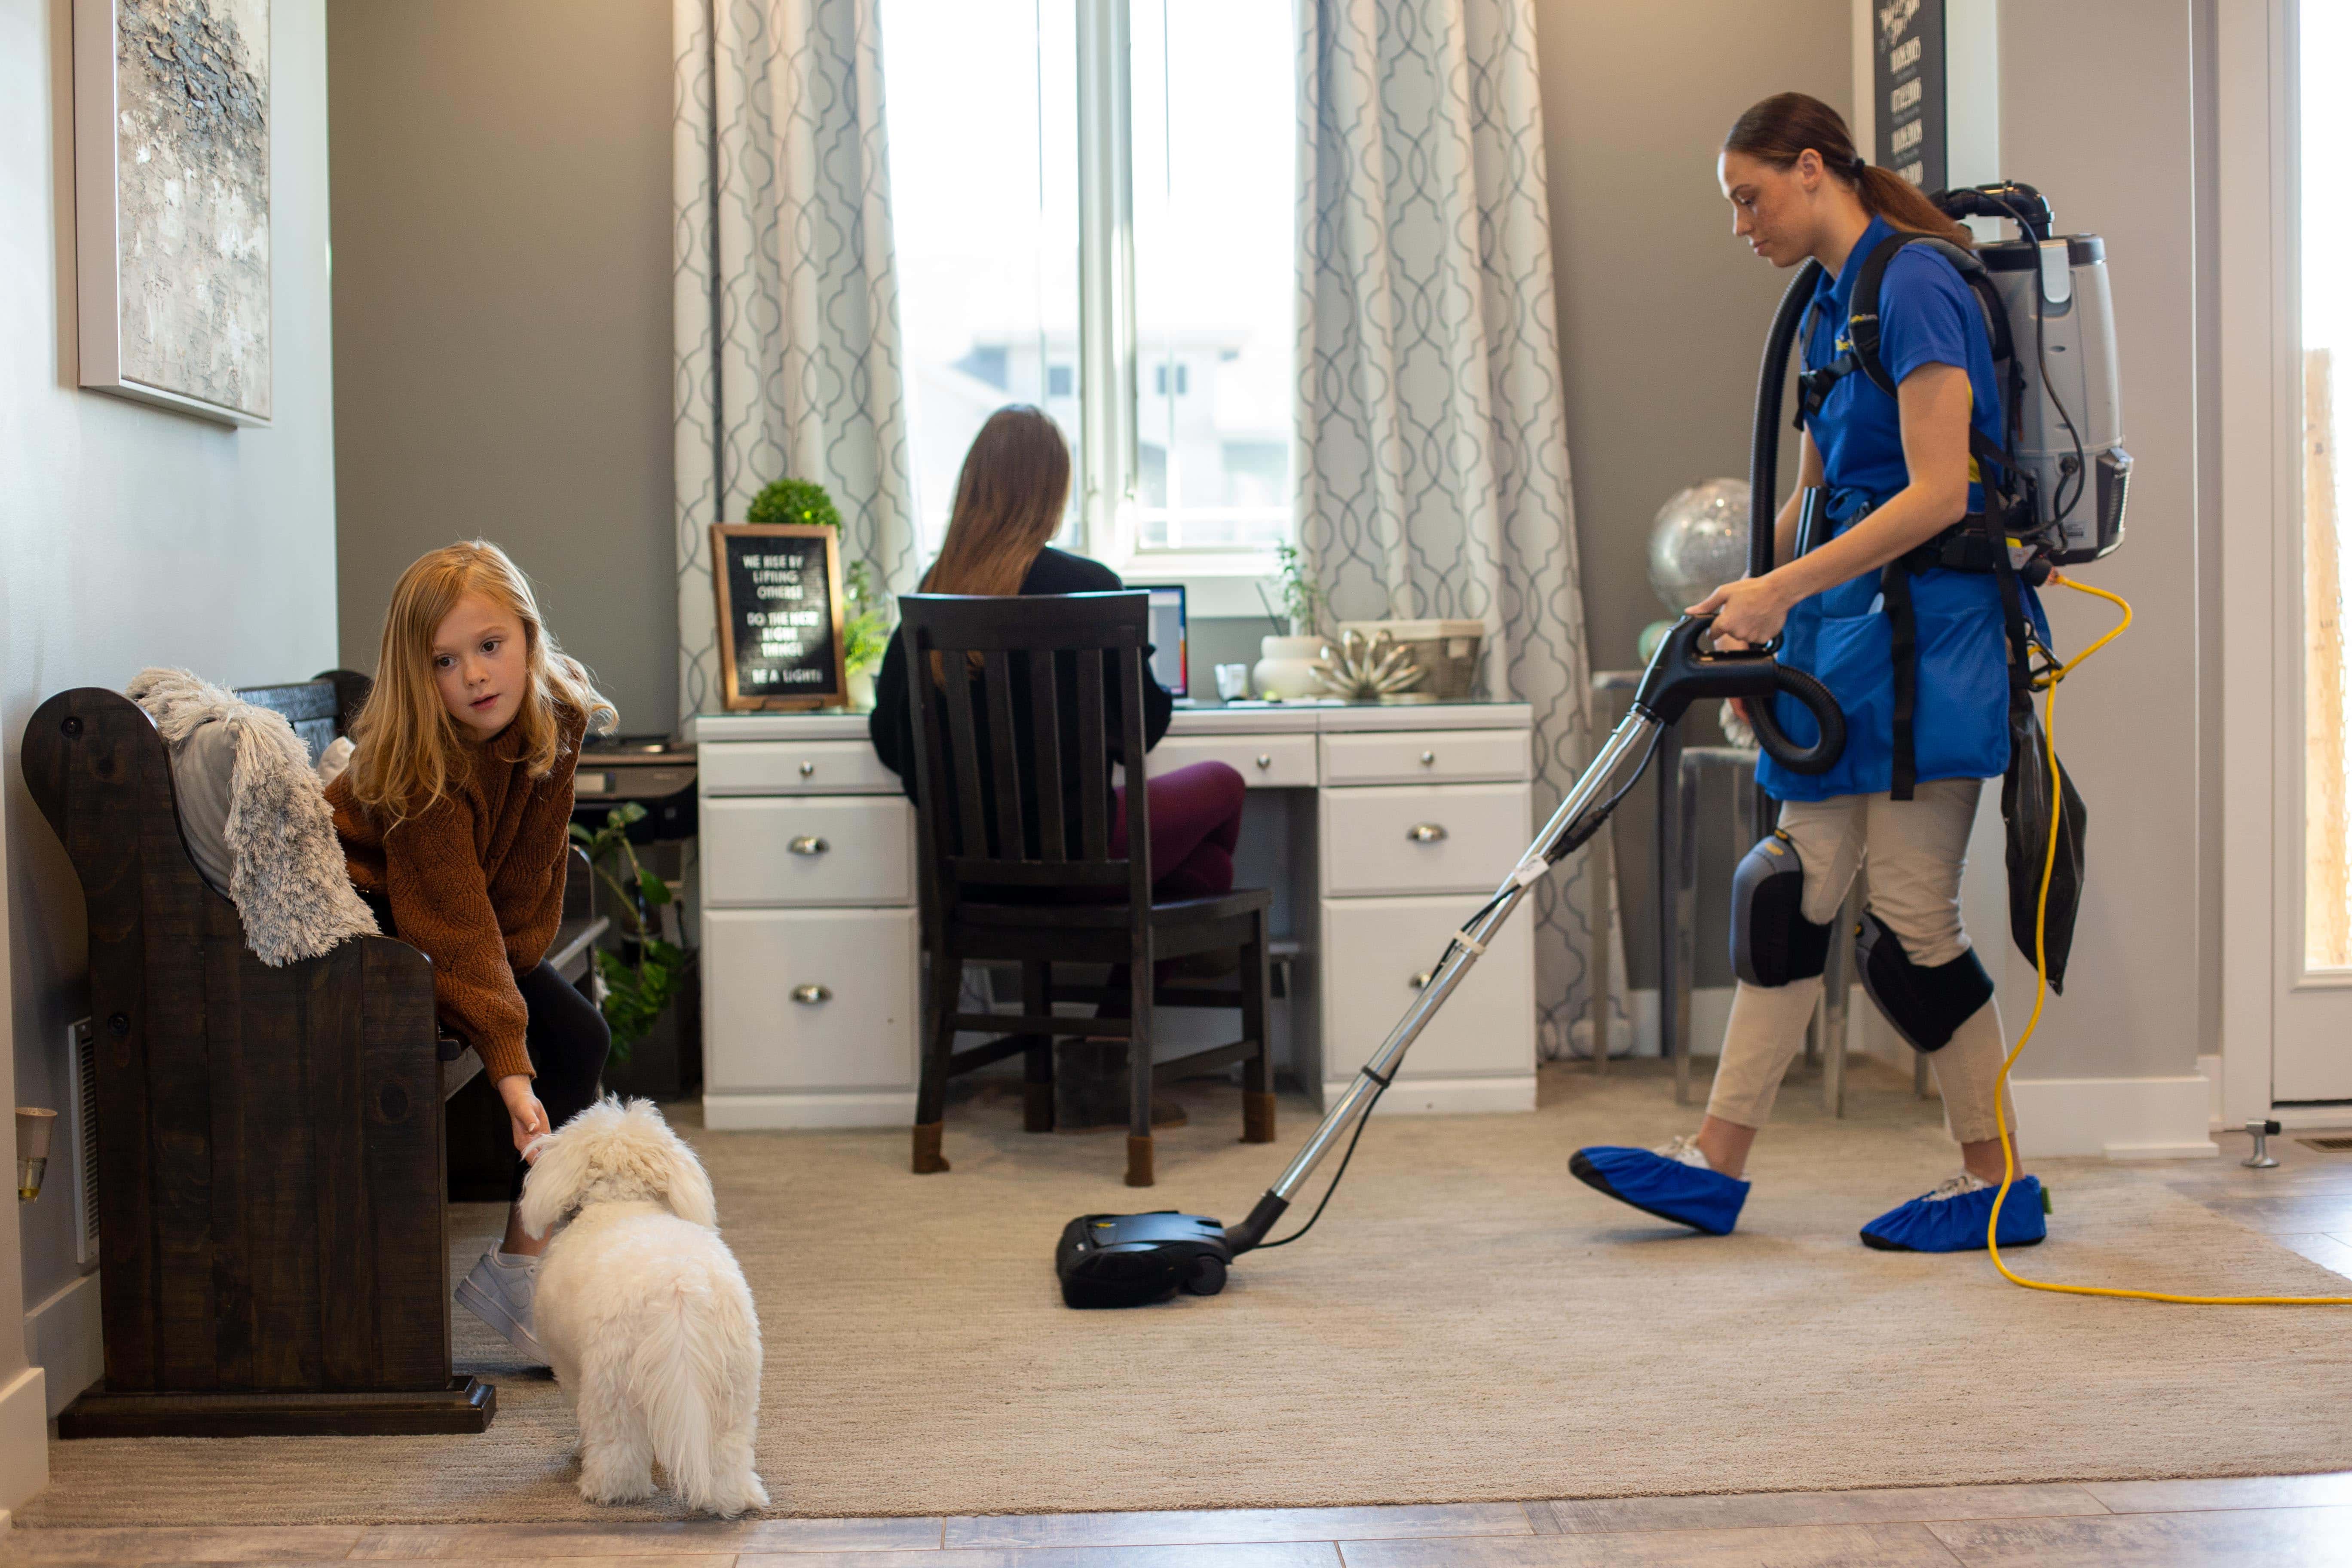 The Maids Oak Lawn IL 60453, US, deep cleaning